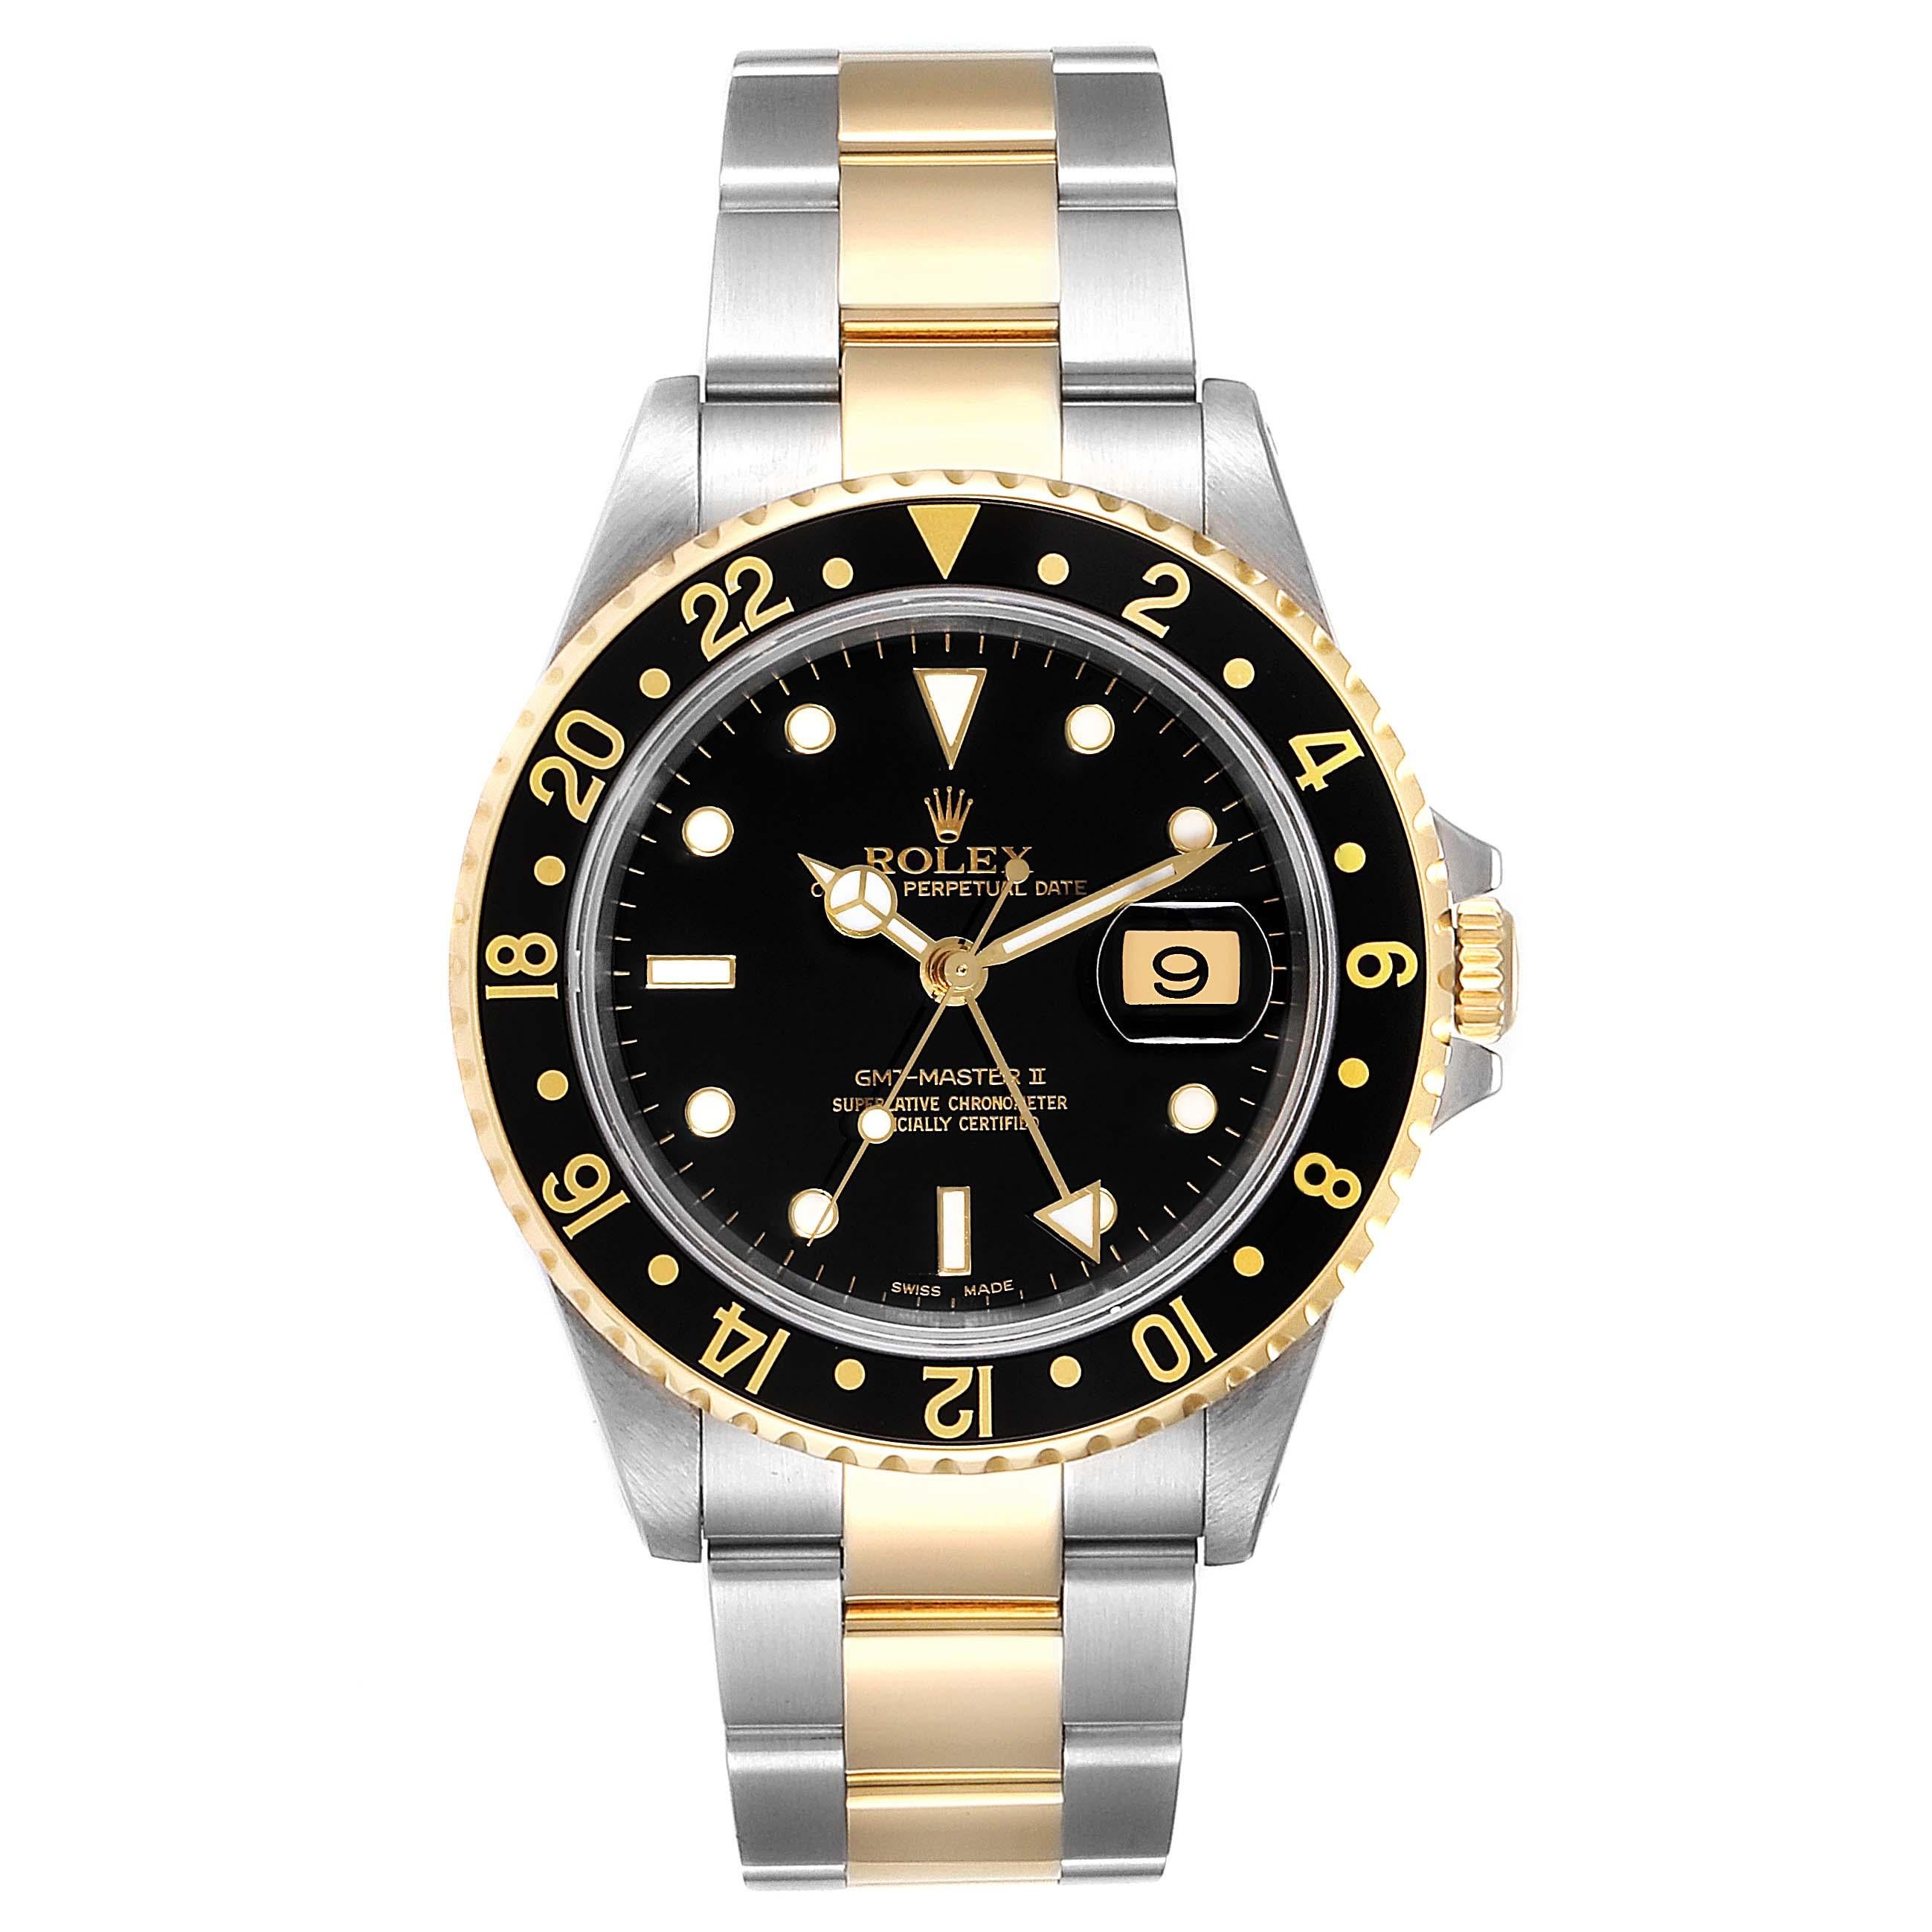 Rolex GMT Master II Yellow Gold Steel Oyster Bracelet Mens Watch 16713. Officially certified chronometer self-winding movement. Stainless steel case 40 mm in diameter. Rolex logo on a crown. 18k yellow gold bidirectional rotating bezel with a